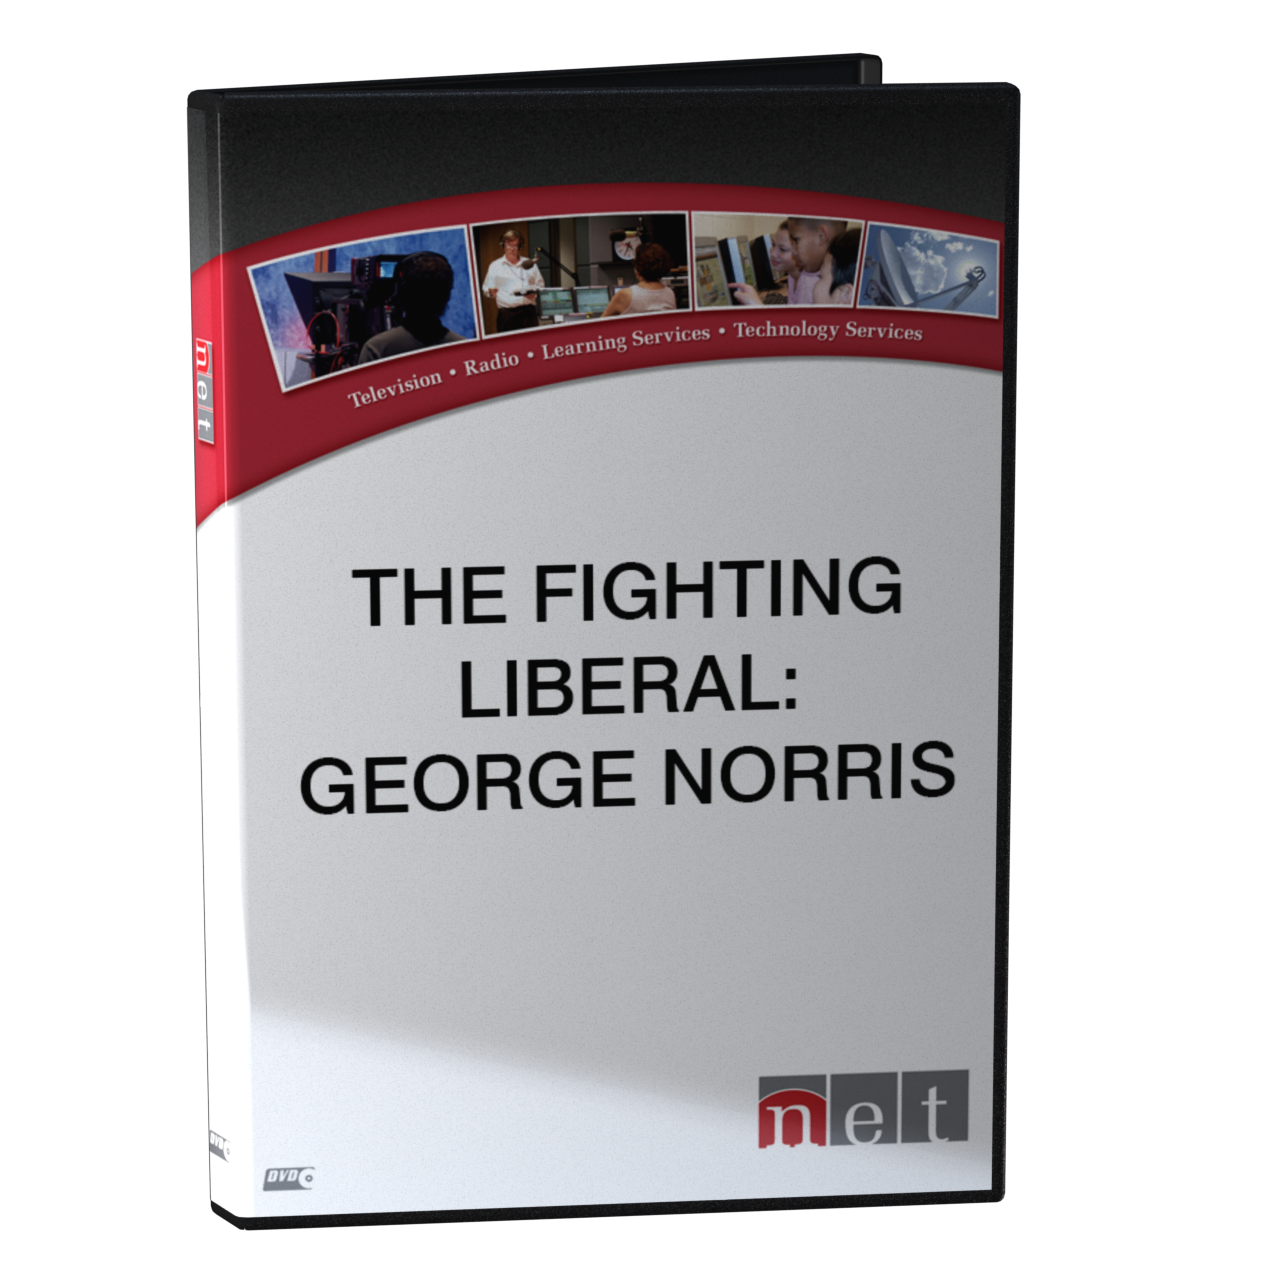 The Fighting Liberal - George Norris